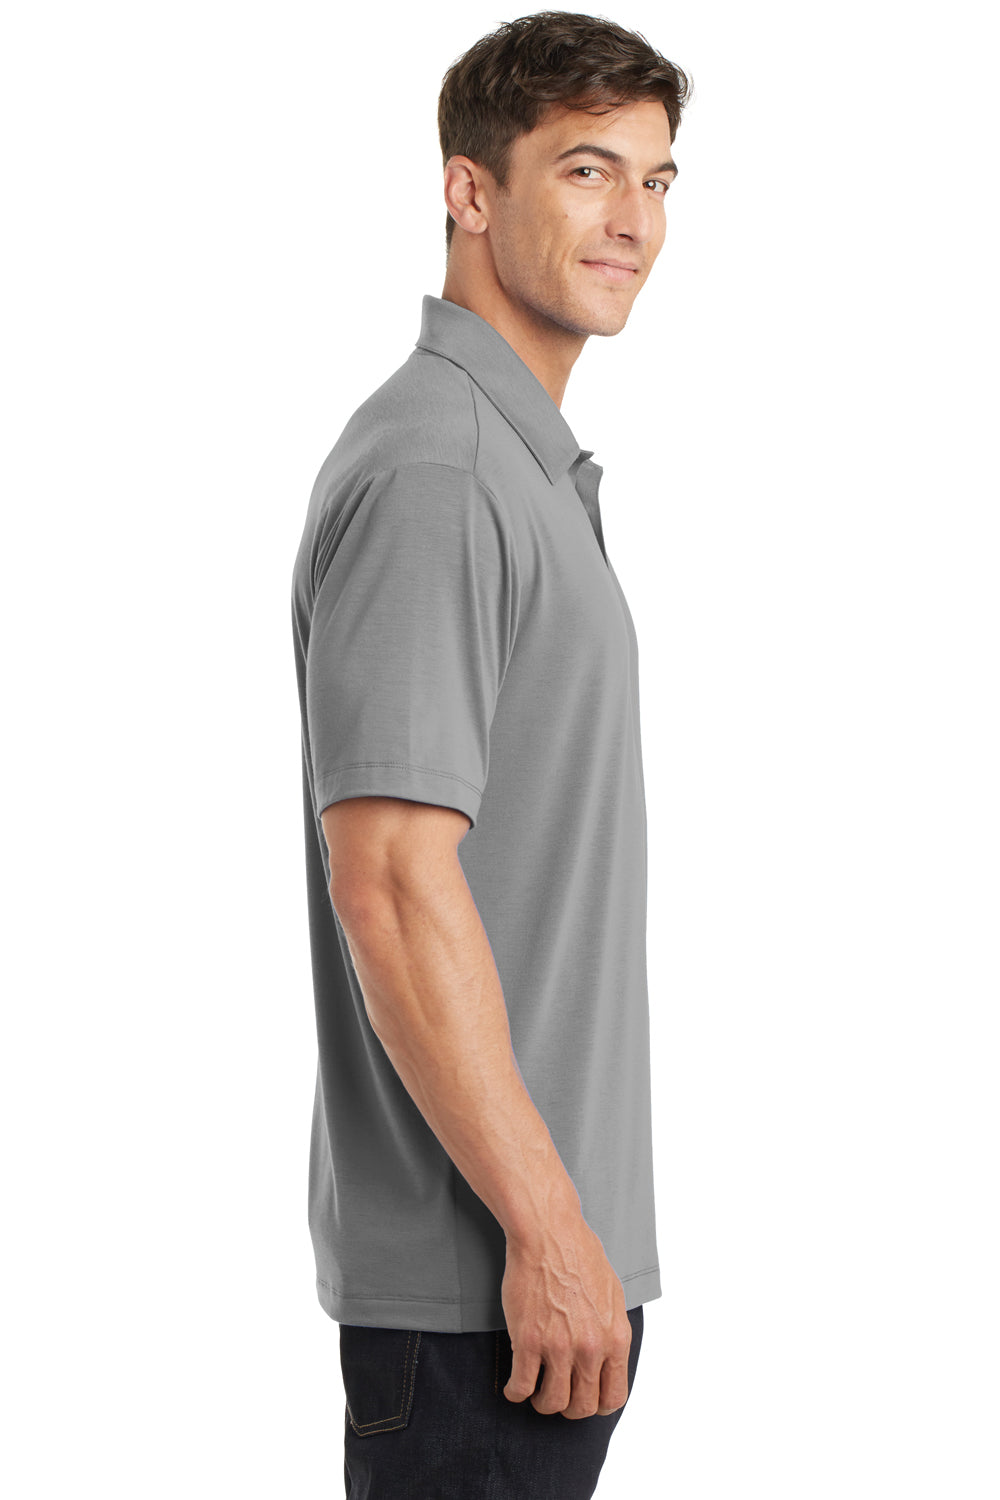 Port Authority K568 Mens Cotton Touch Performance Moisture Wicking Short Sleeve Polo Shirt Grey Side